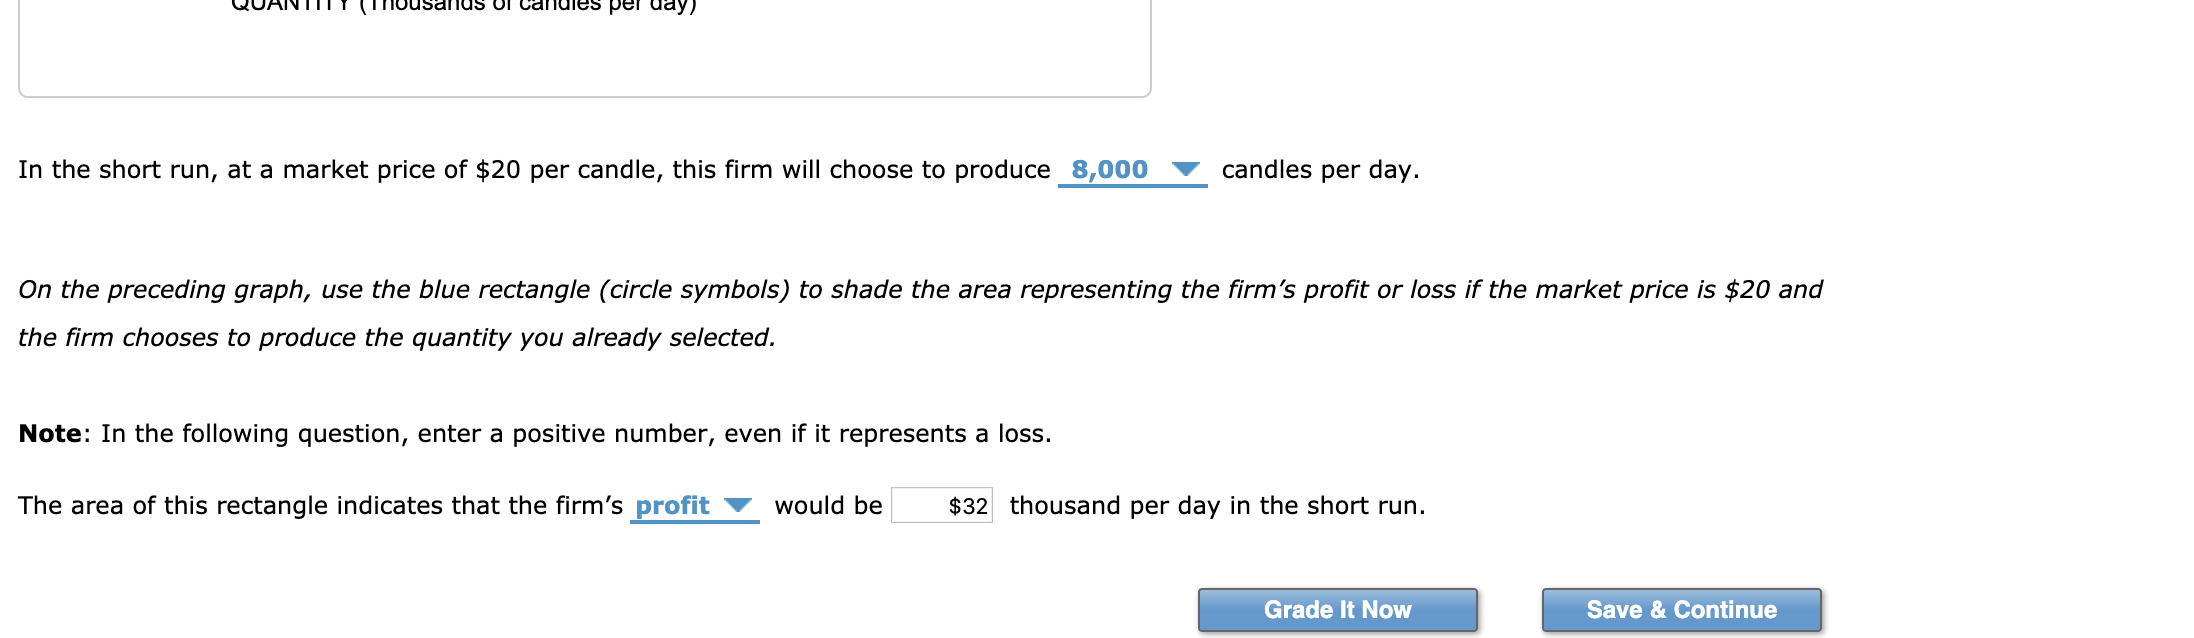 QUANTIT IousanTUS or candiEs per day)
In the short run, at a market price of $20 per candle, this firm will choose to produce 8,000
candles per day.
On the preceding graph, use the blue rectangle (circle symbols) to shade the area representing the firm's profit or loss if the market price is $20 and
the firm chooses to produce the quantity you already selected.
Note: In the following question, enter a positive number, even if it represents a loss.
The area of this rectangle indicates that the firm's profit
would be
$32 thousand per day in the short run.
Grade It Now
Save & Continue
